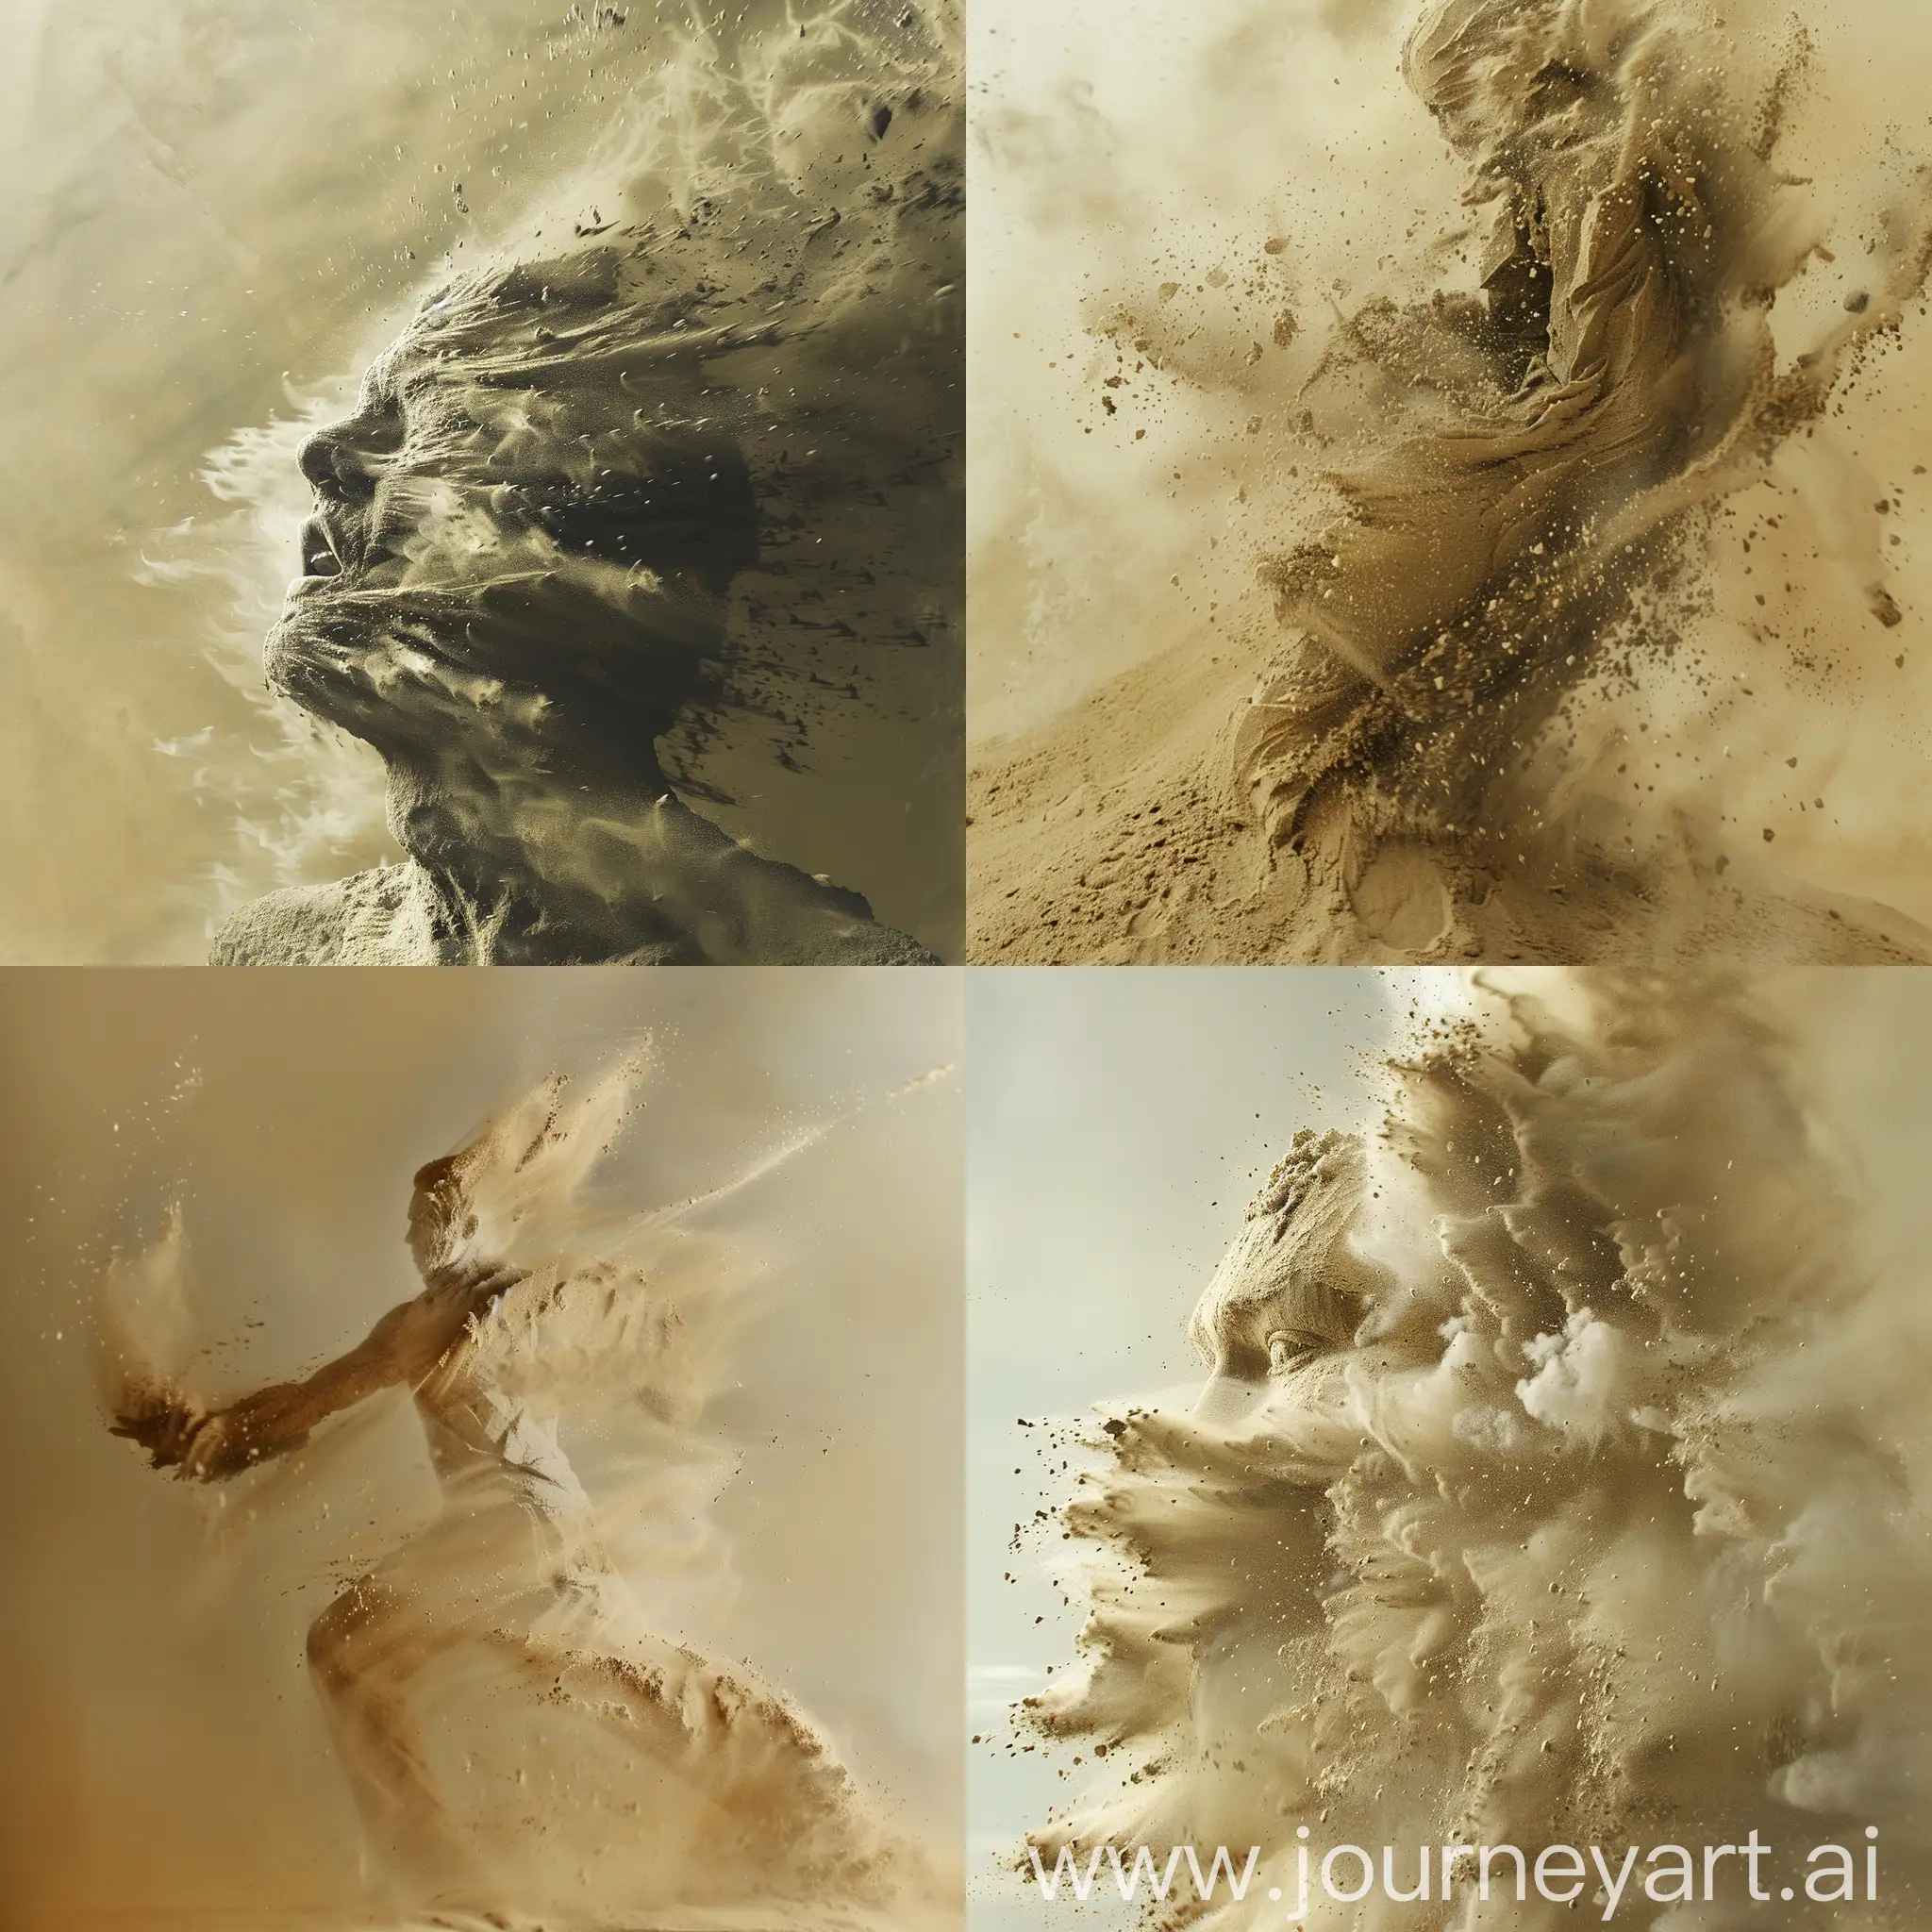 an image of a human figure composed entirely of sand being blown away in the wind. The scene should evoke a sense of motion and dynamism, resembling a real photograph.